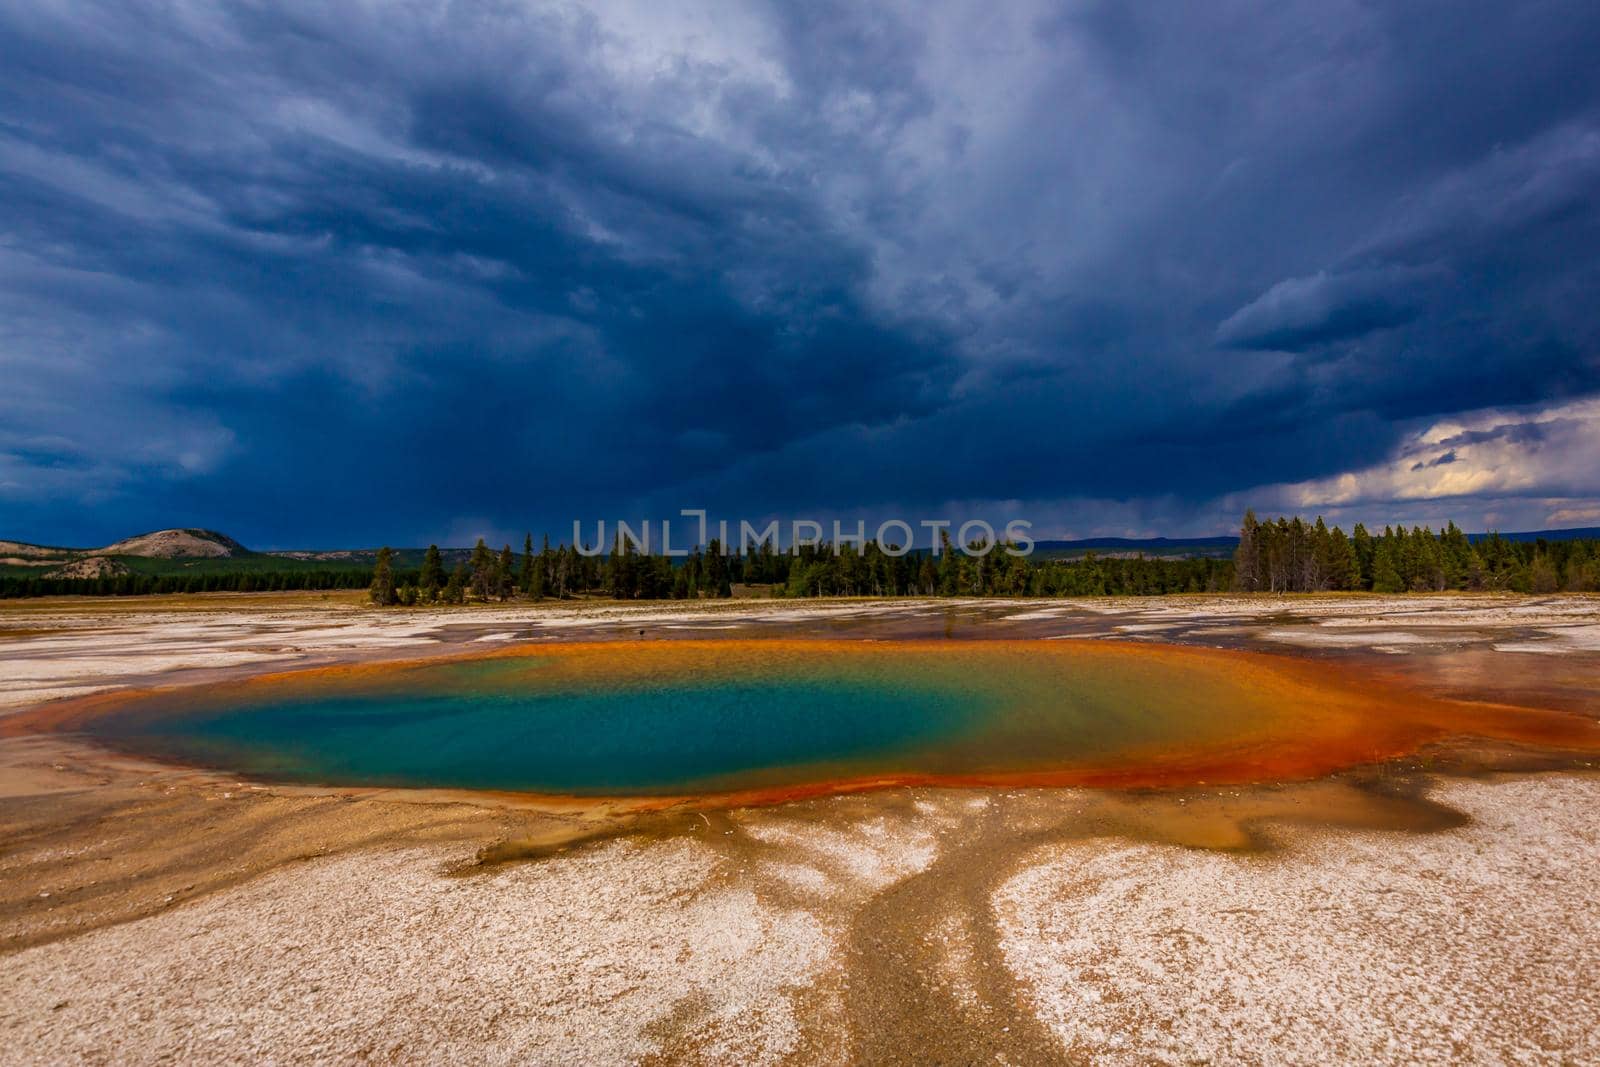 Turquoise Pool is a hot spring in the Midway Geyser Basin of Yellowstone National Park